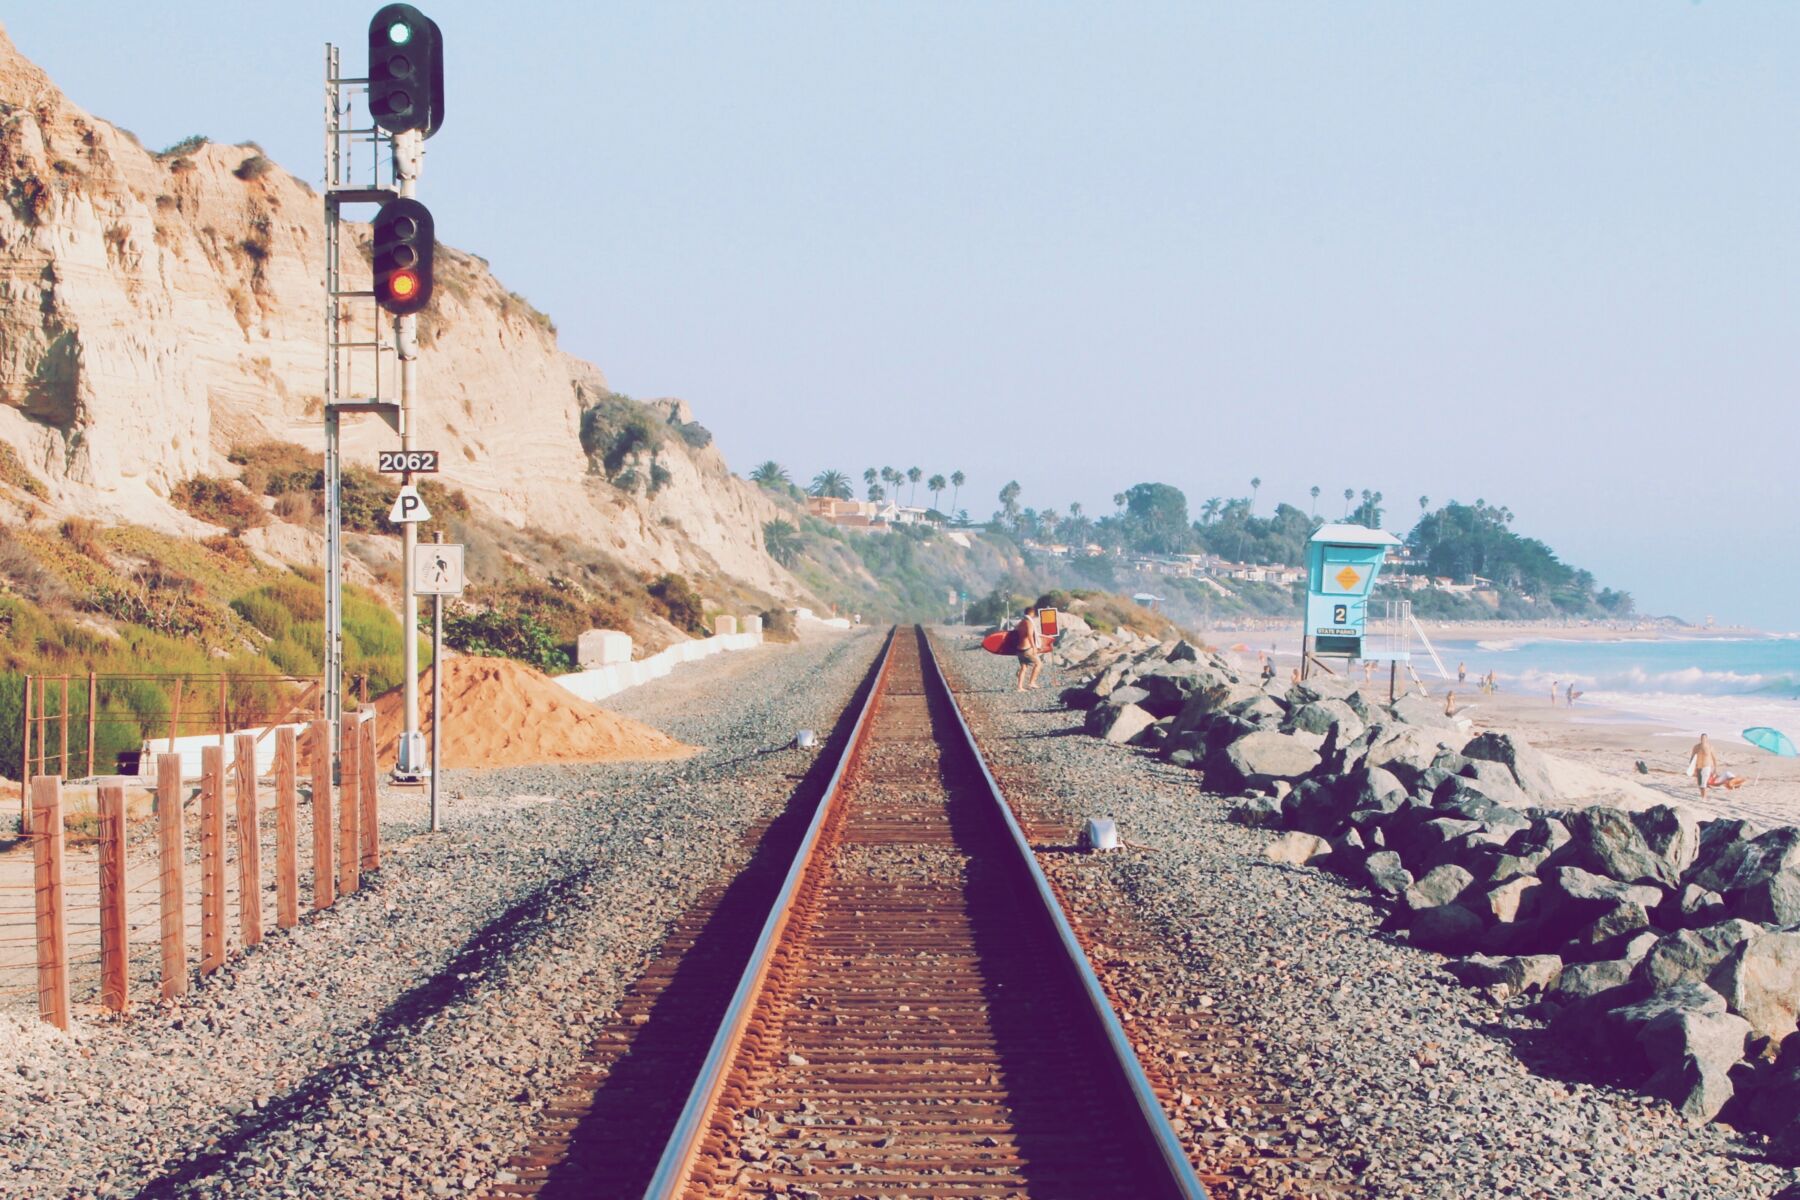 This is an image of the train tracks in San Clemente, California.